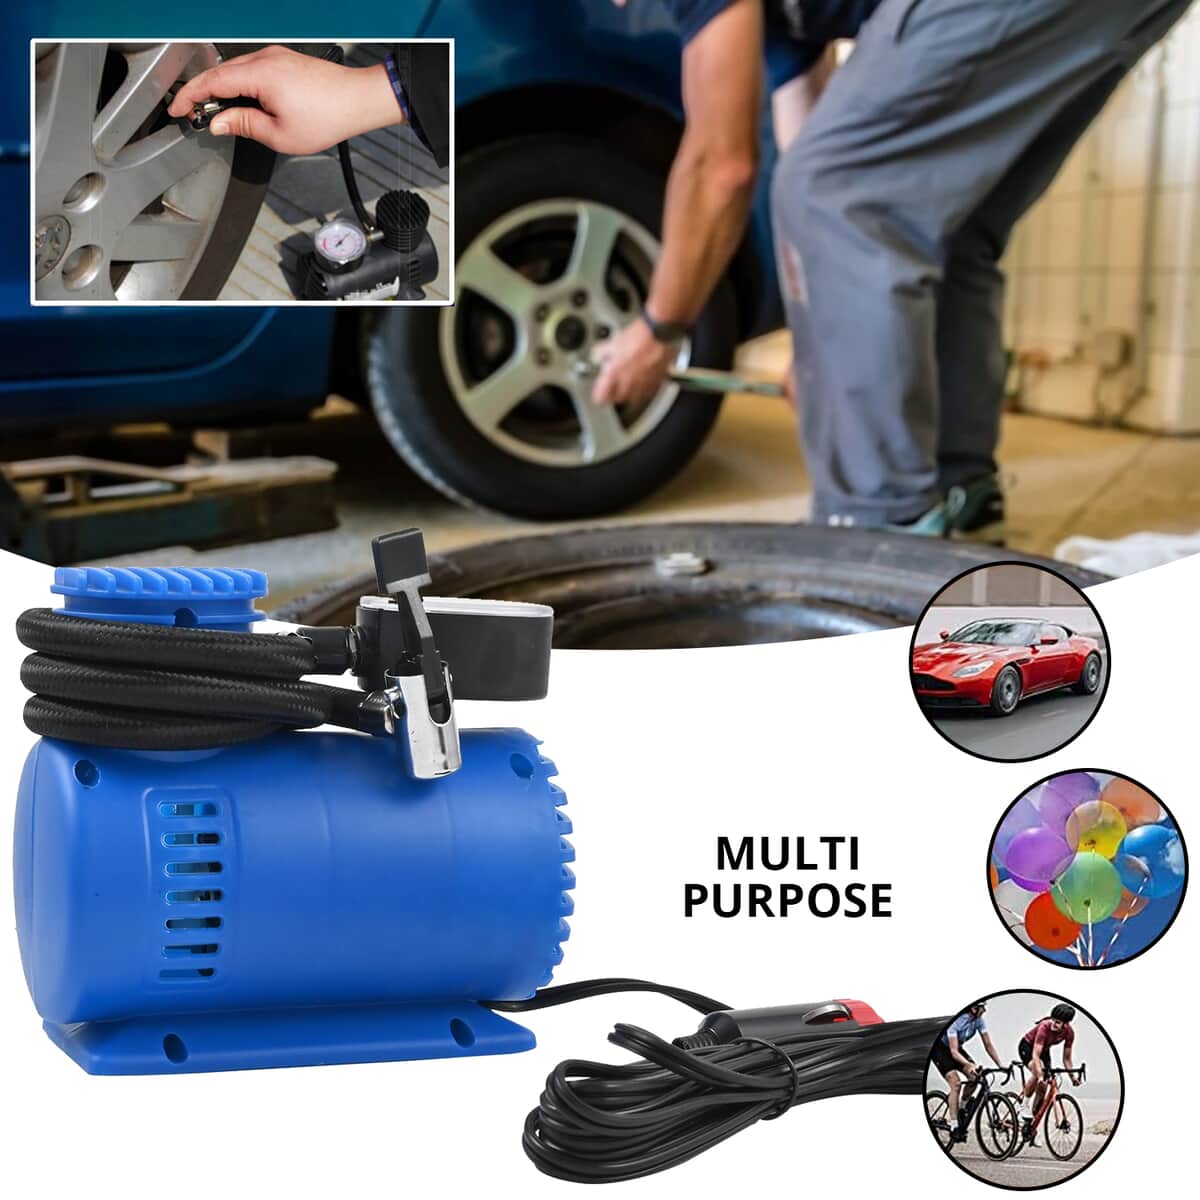 AUTO EFFECTS Mini Air Compressor with Built-in Pressure Gauge -Blue image number 1